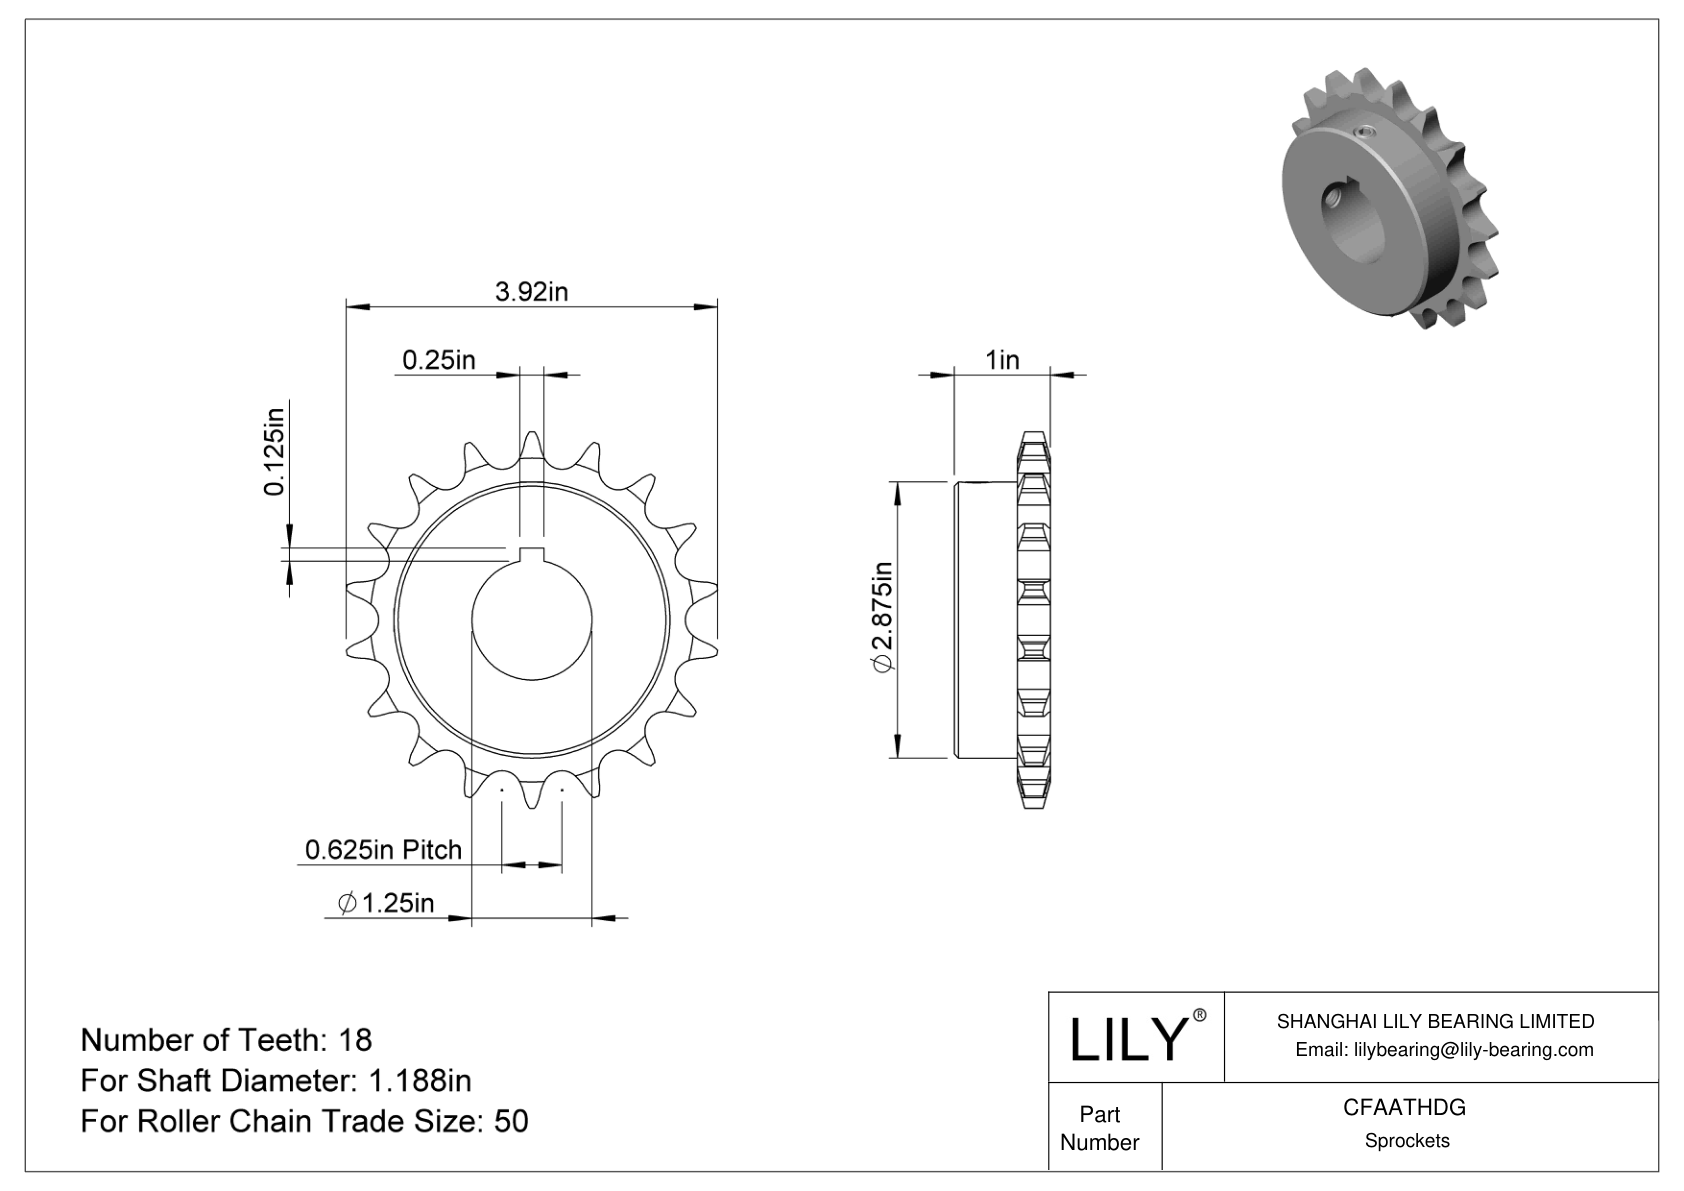 CFAATHDG Wear-Resistant Sprockets for ANSI Roller Chain cad drawing